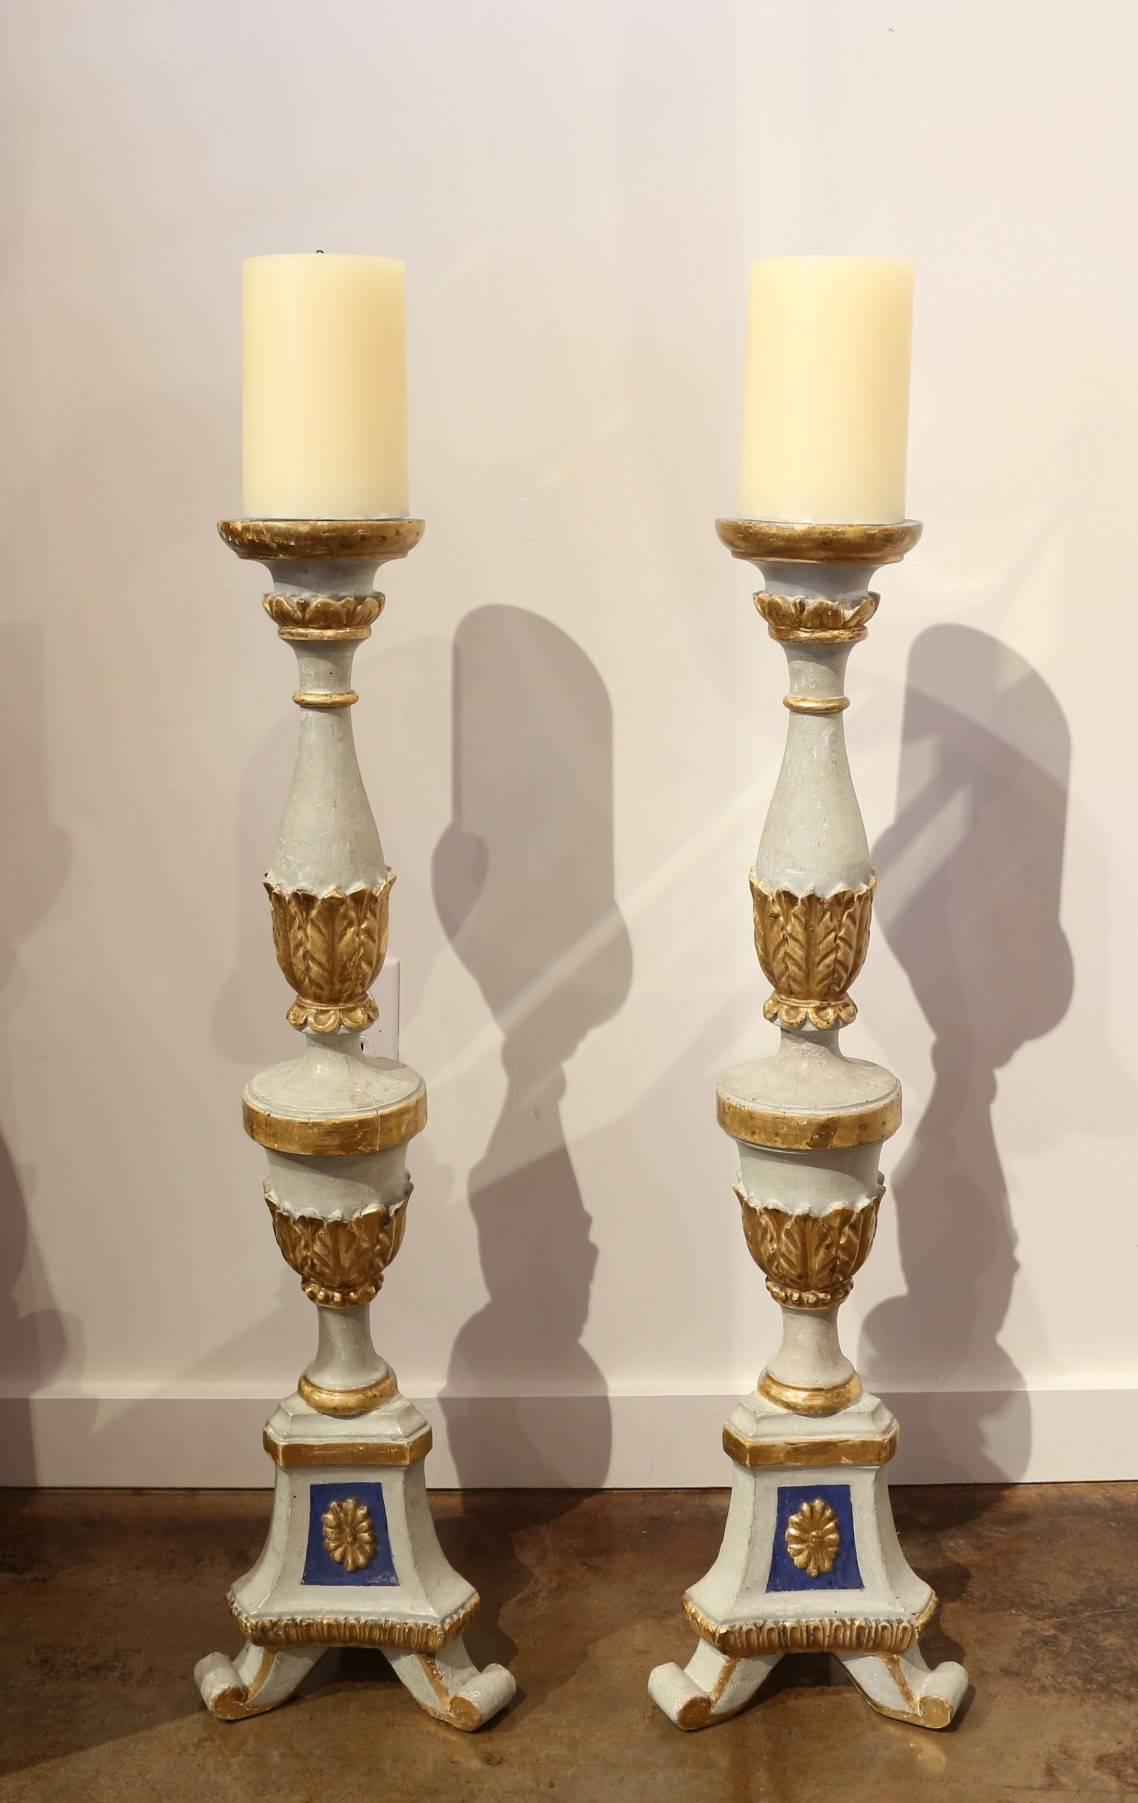 Pair of antique 19th century carved wooden altar candlesticks in an aged ivory color with gold leaf and lapis colored accents, Italy, circa 1870.